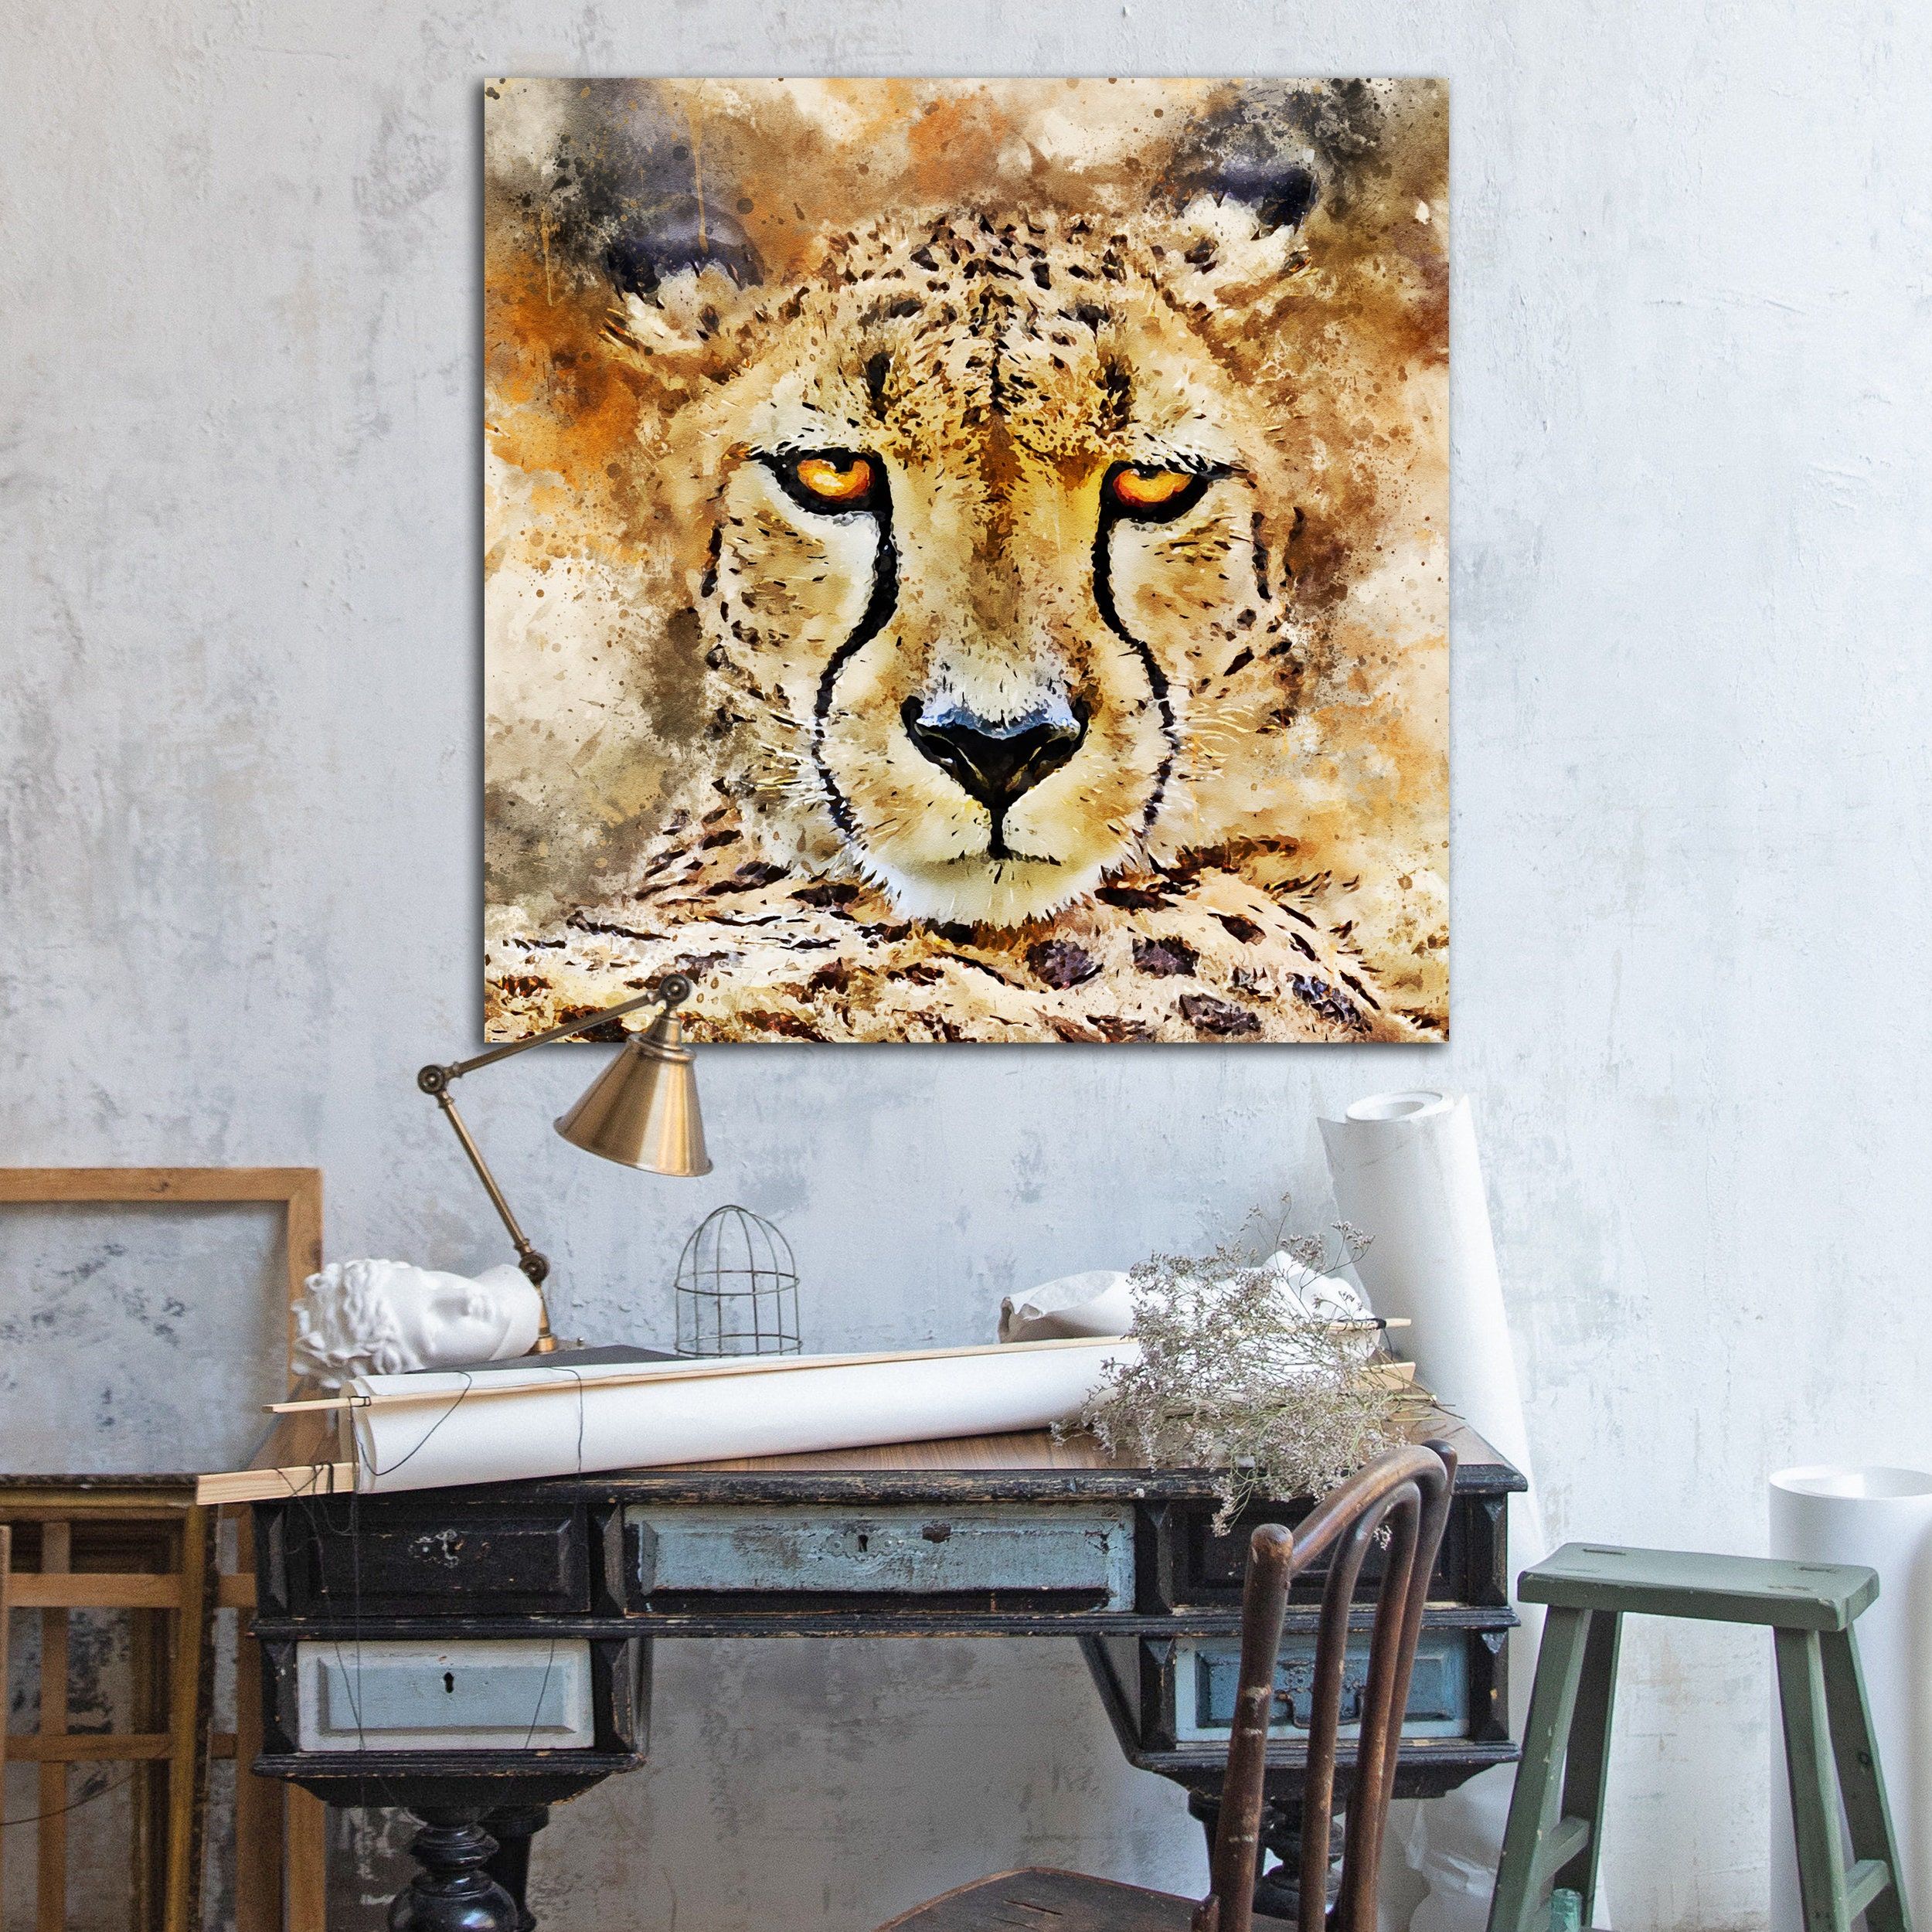 Cheetah Print – Etsy France With Regard To Most Recent Cheetah Wall Art (View 20 of 20)